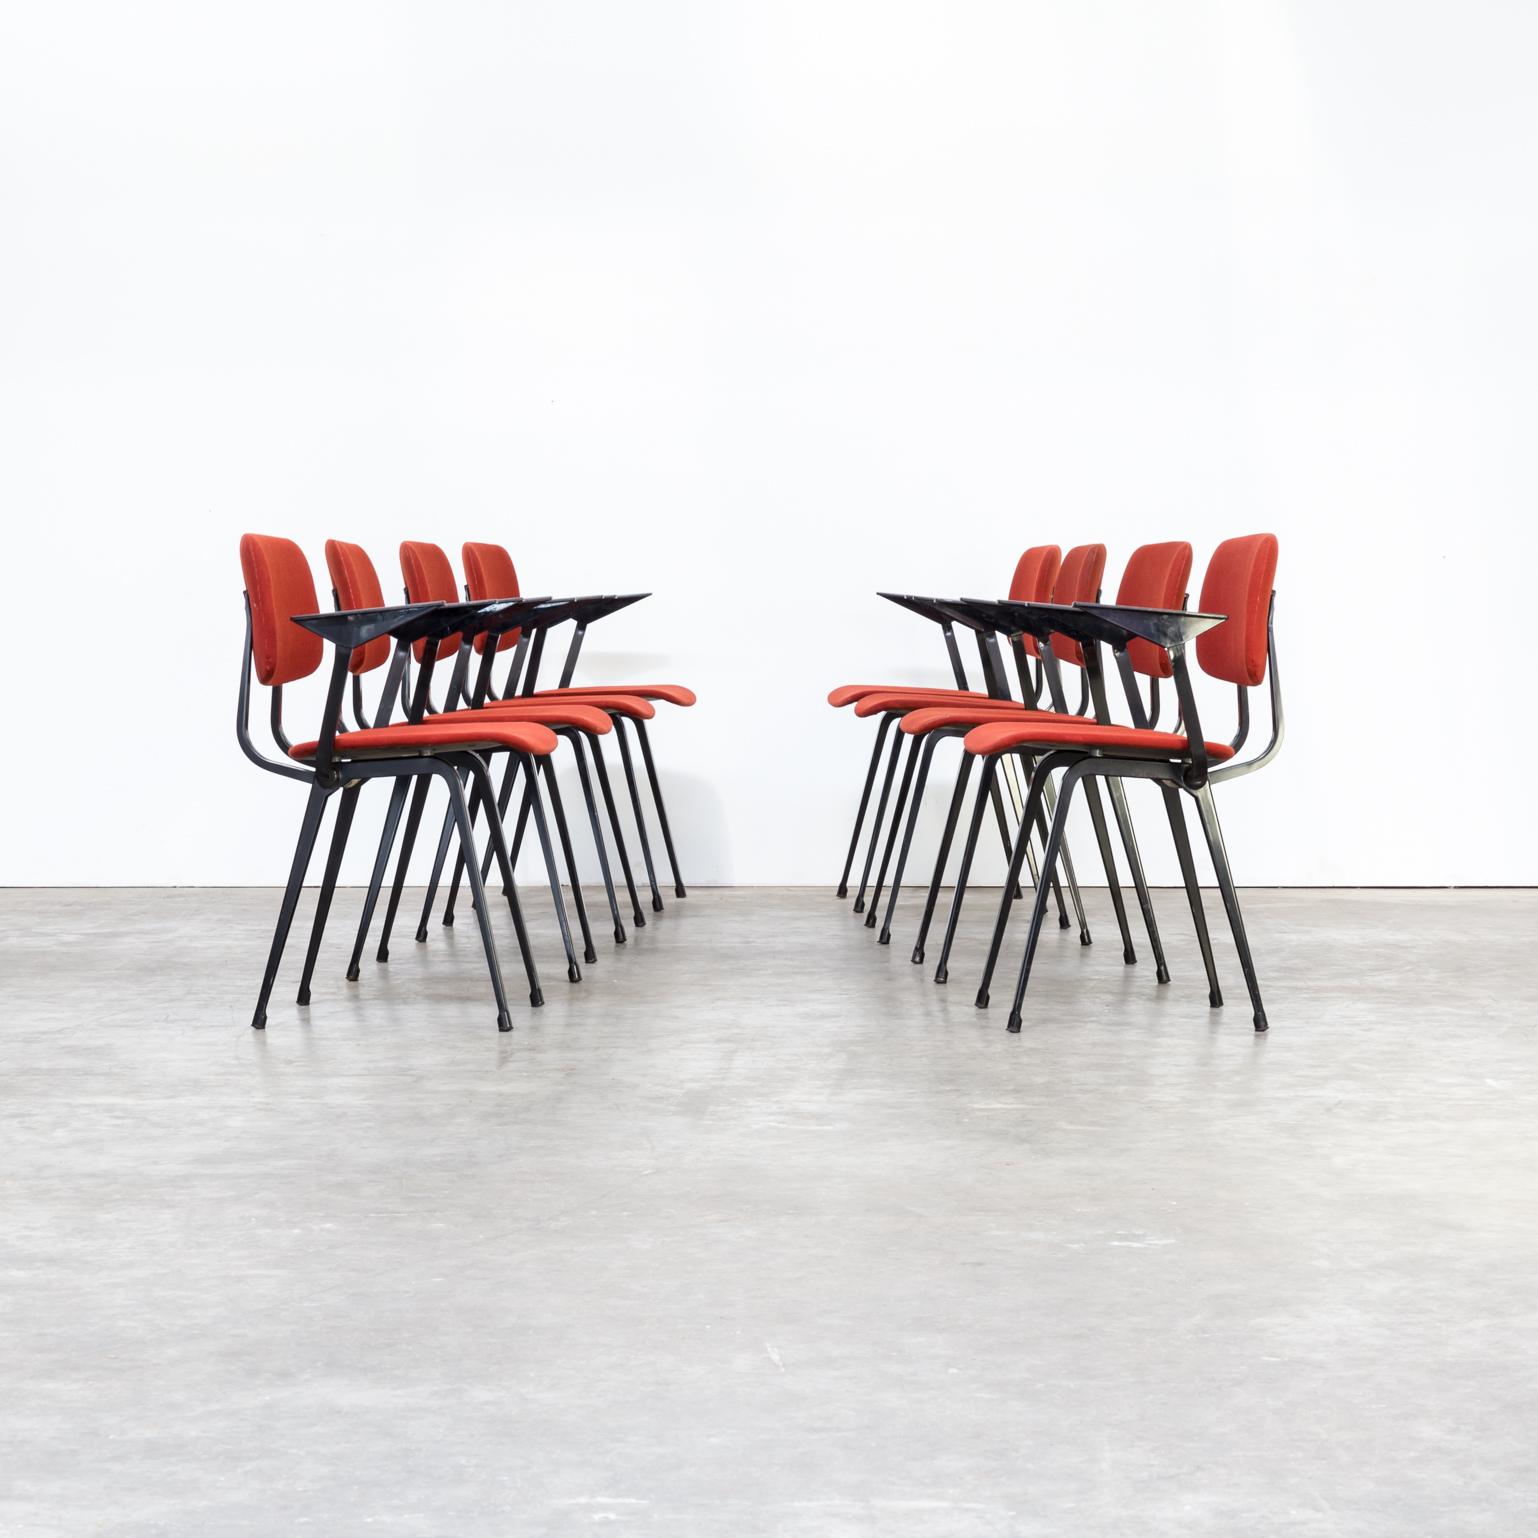 Dutch 1950s Friso Kramer ‘Revolt’ Chair for Ahrend Set of Eight For Sale